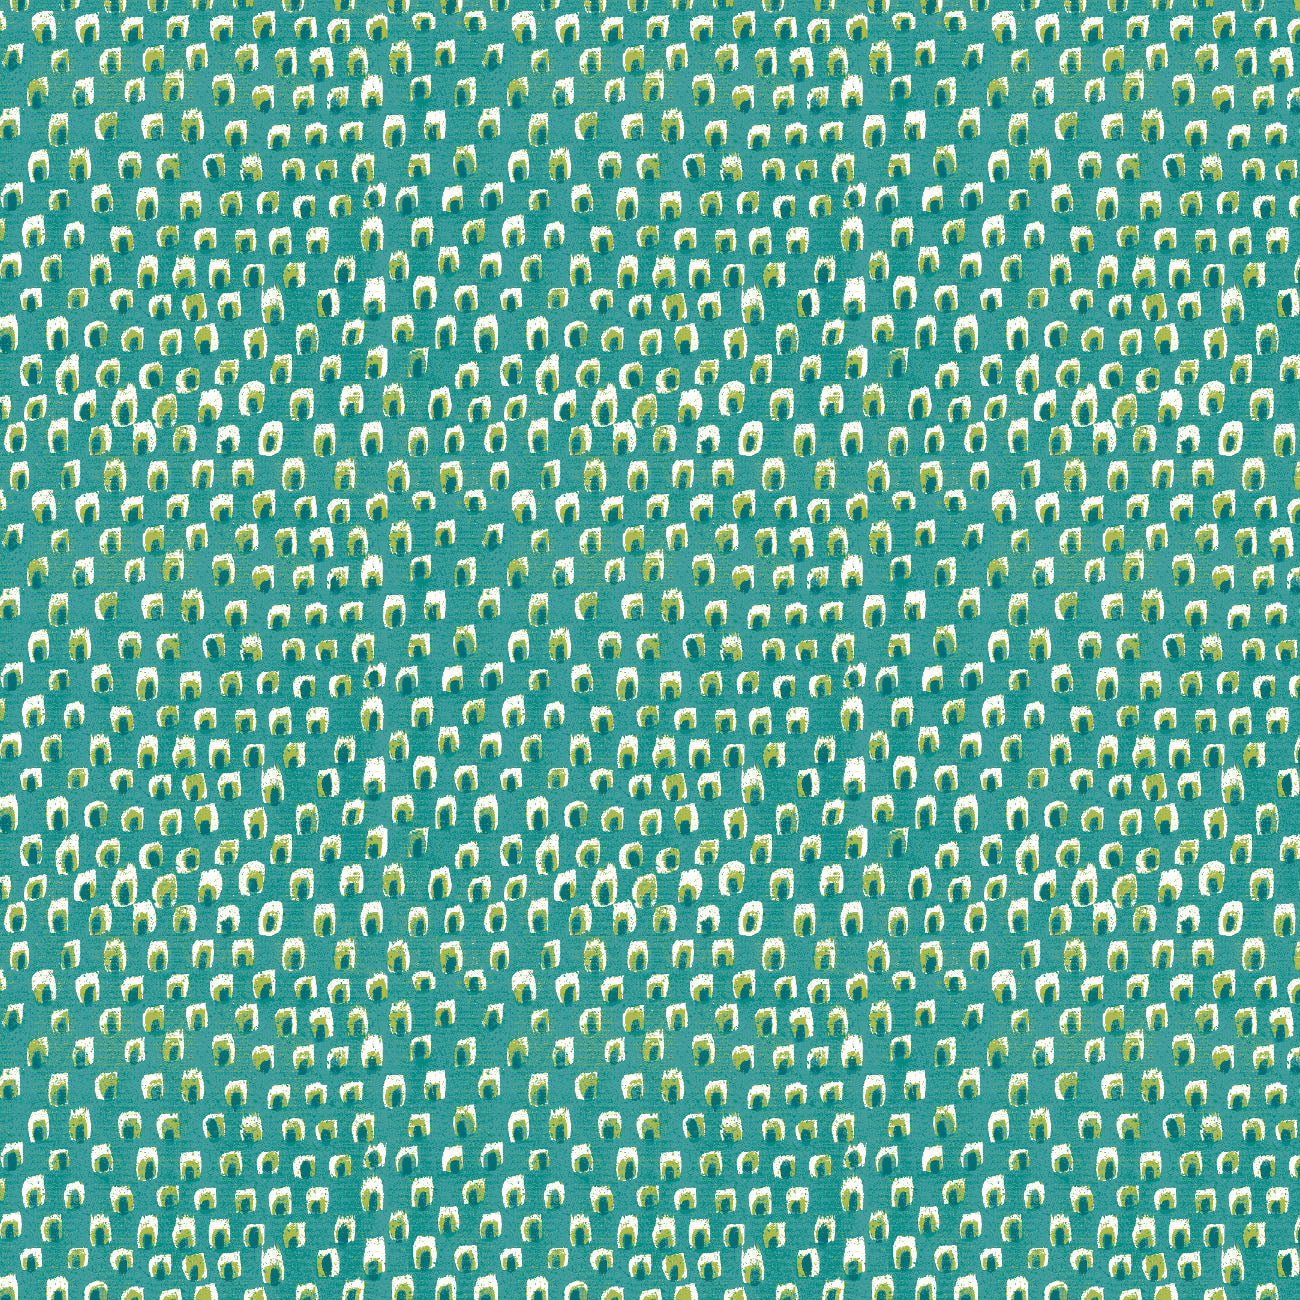 Topography Collection - Sprout - Teal - Cotton 66220604-03